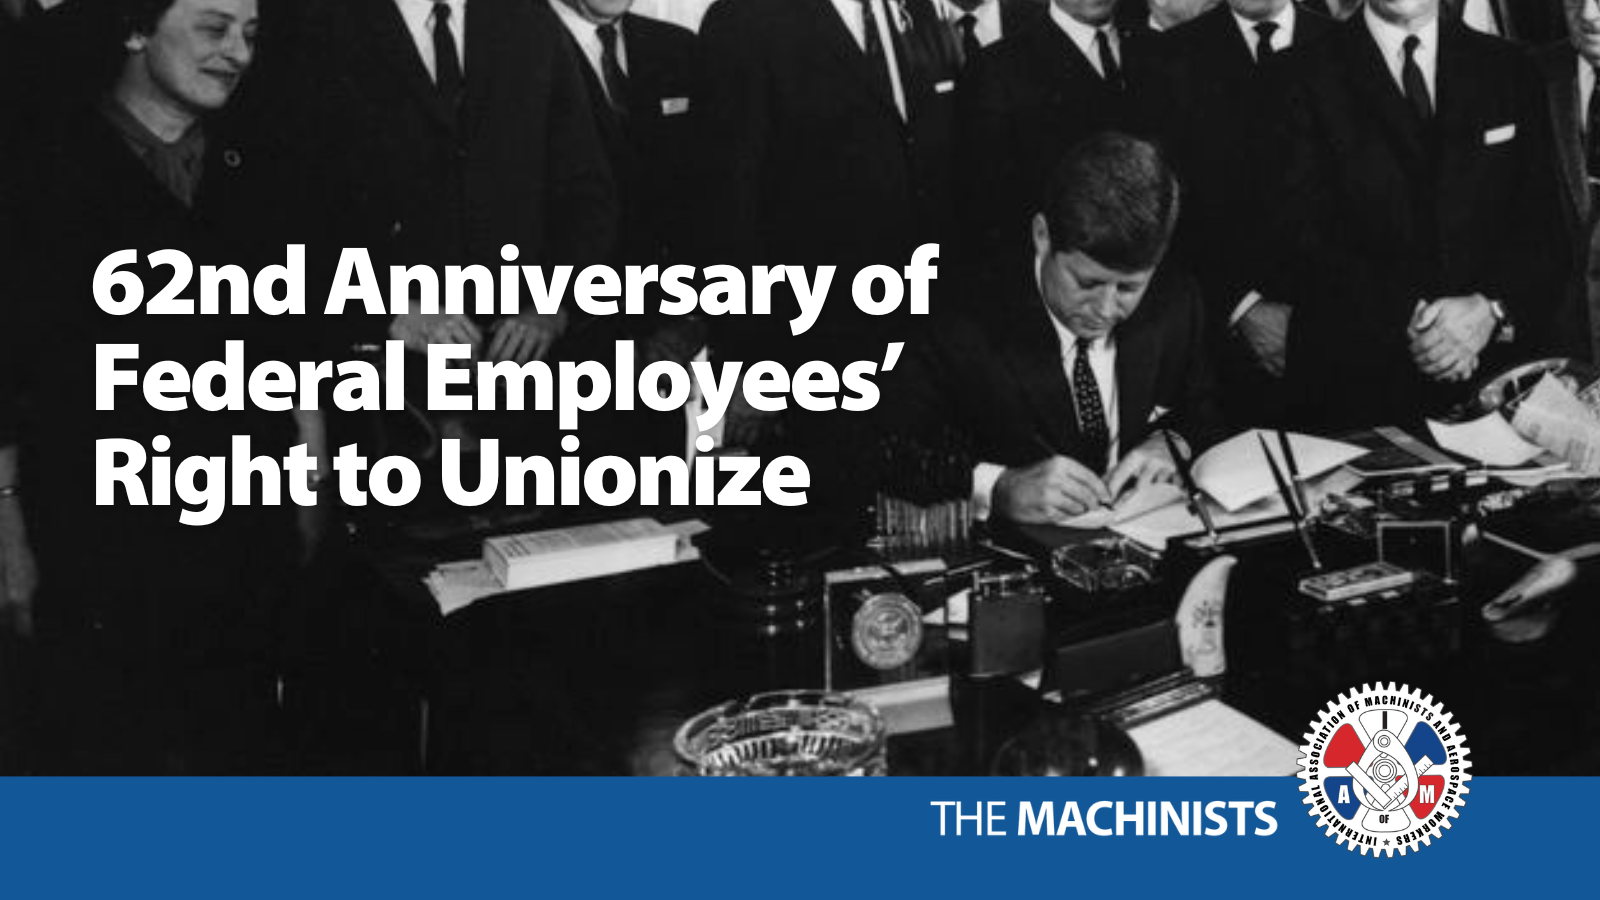 Today is the 62nd Anniversary of Federal Employees’ Right to Unionize